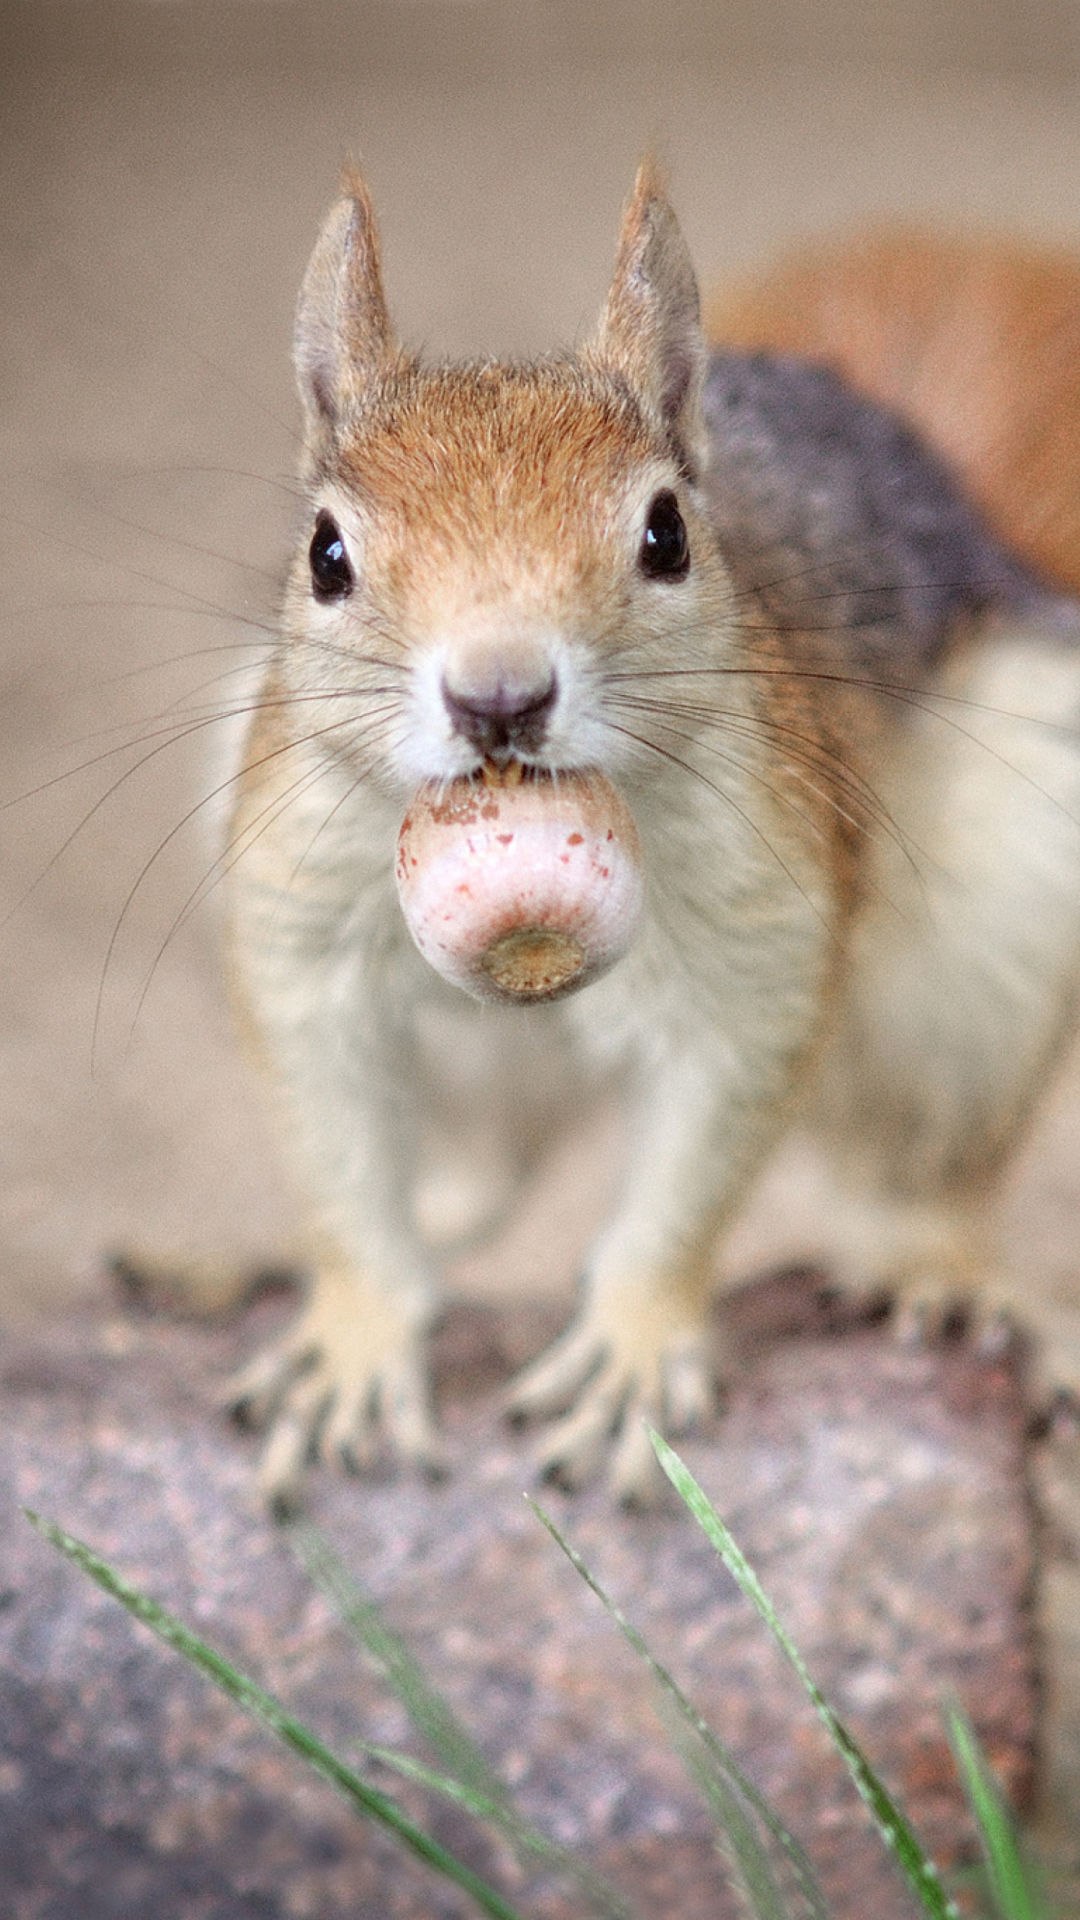 Funny Squirrel With Nut screenshot #1 1080x1920